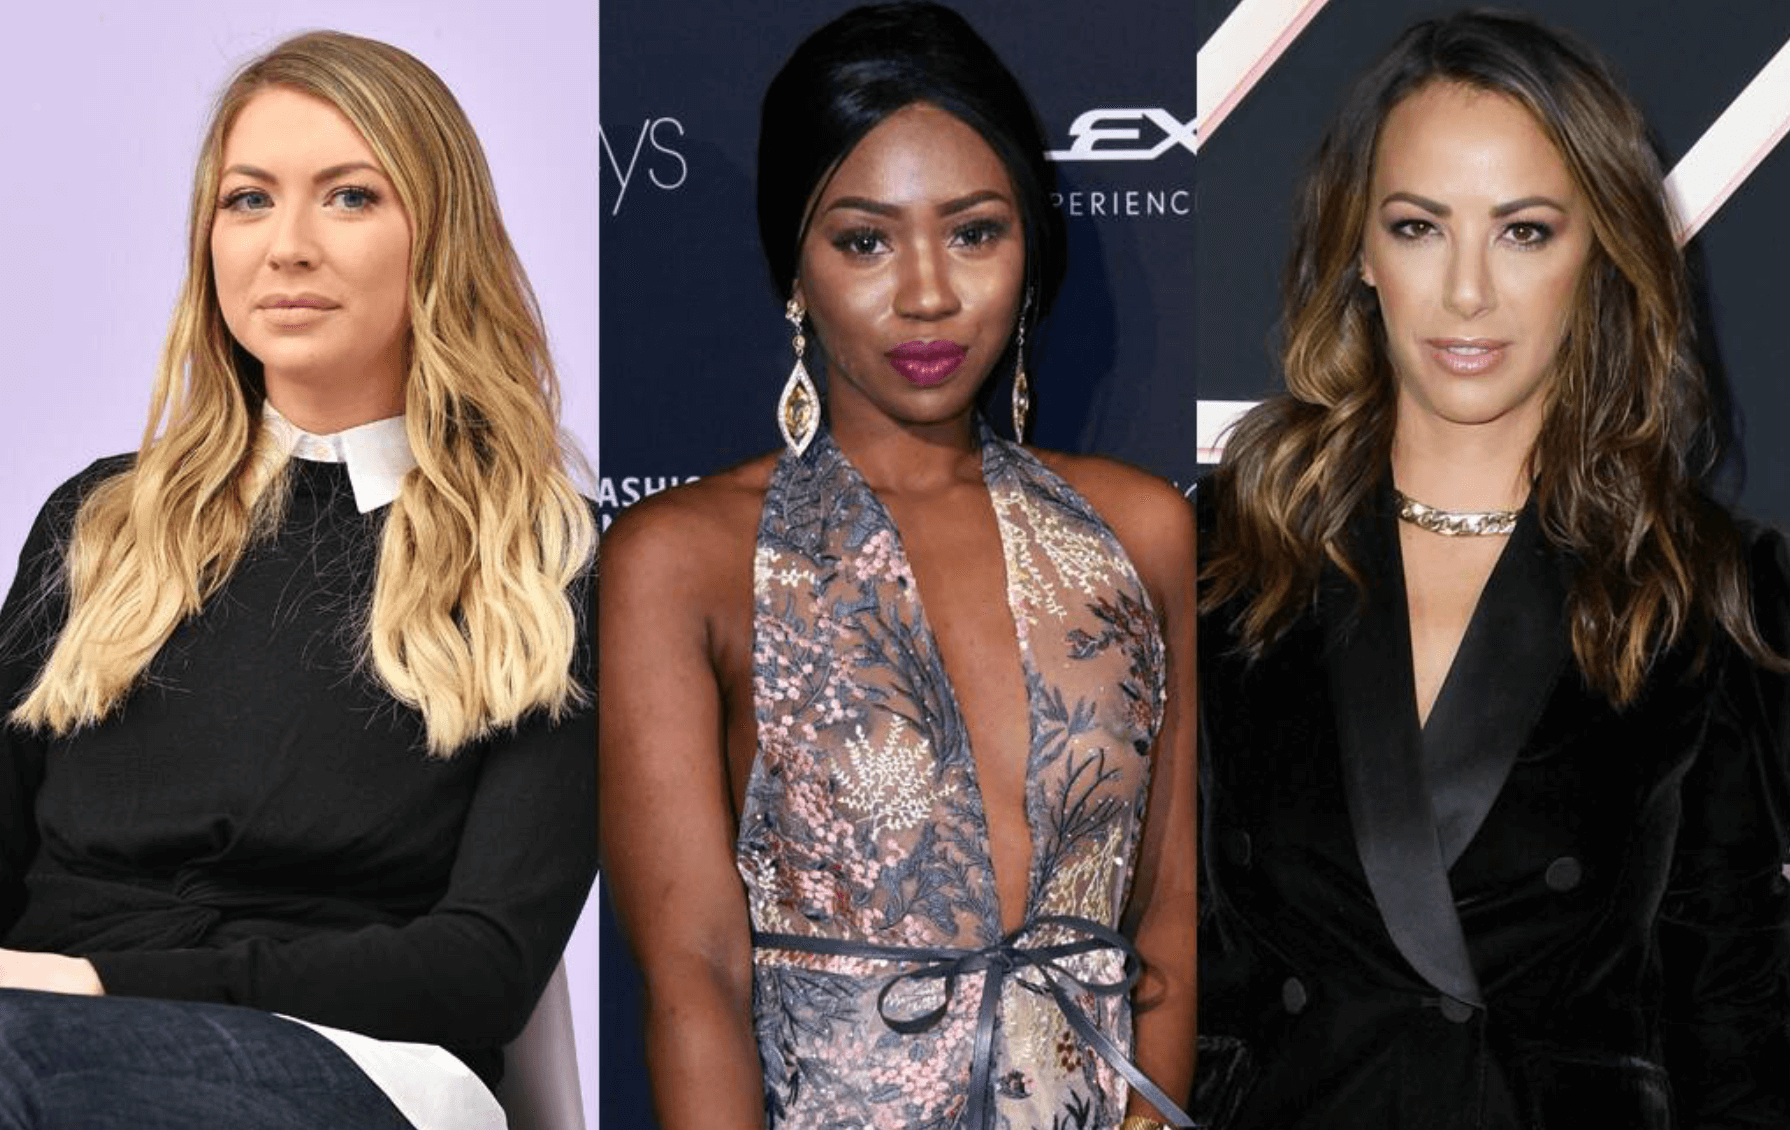 Stassi Schroeder and Kristen Doute Apologize to Former ‘Vanderpump Rules’ Costar Faith Stowers!